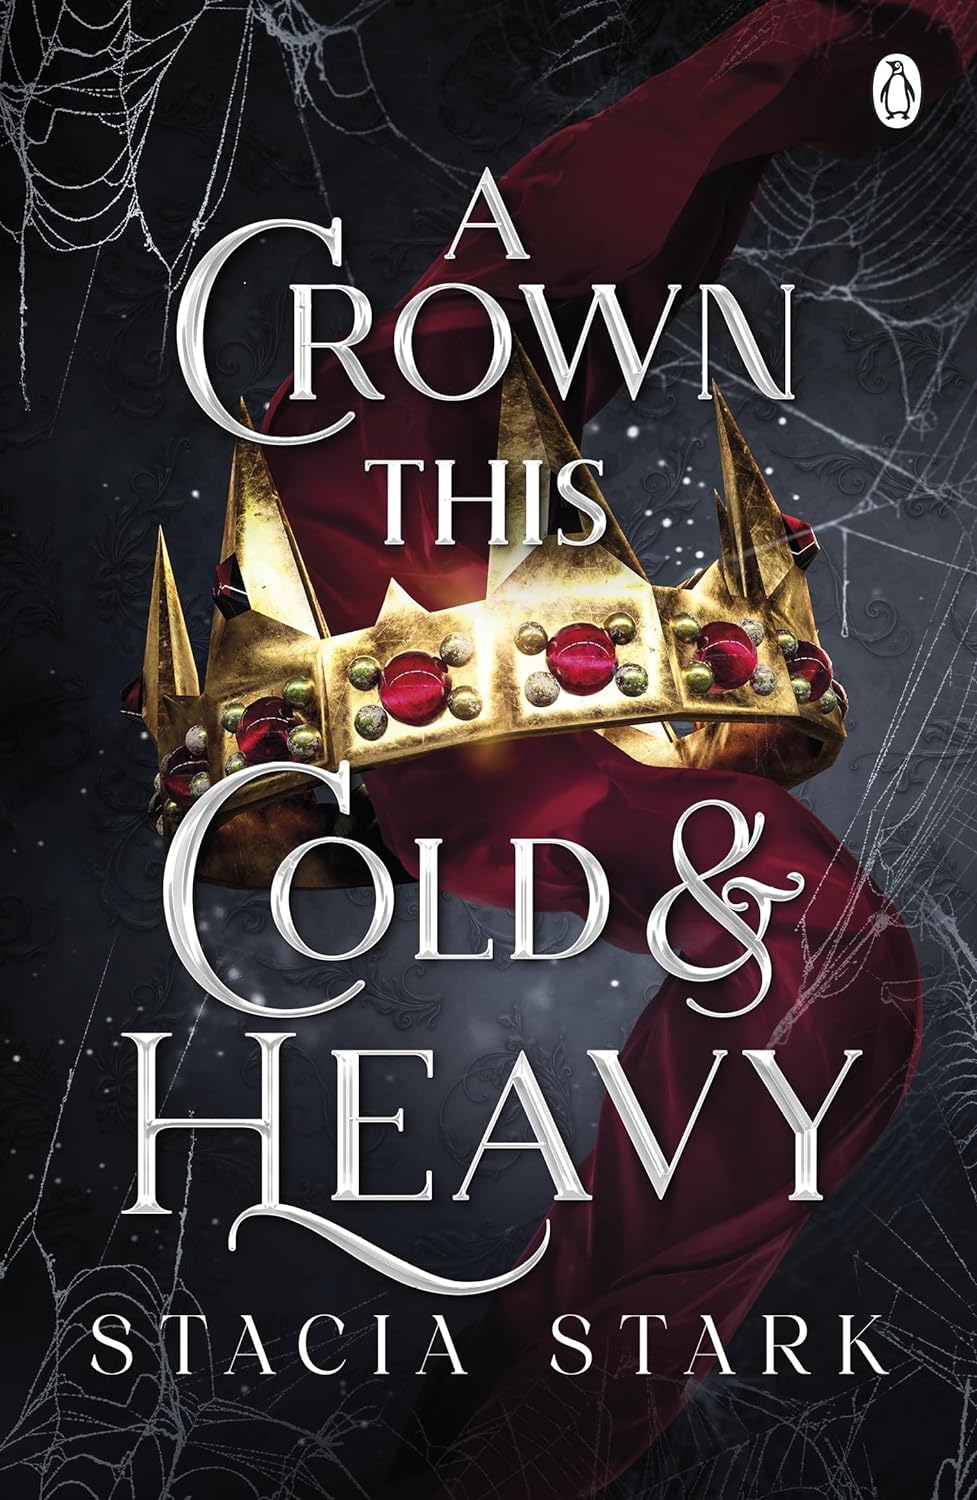 A Crown This Cold and Heavy (Book 3)